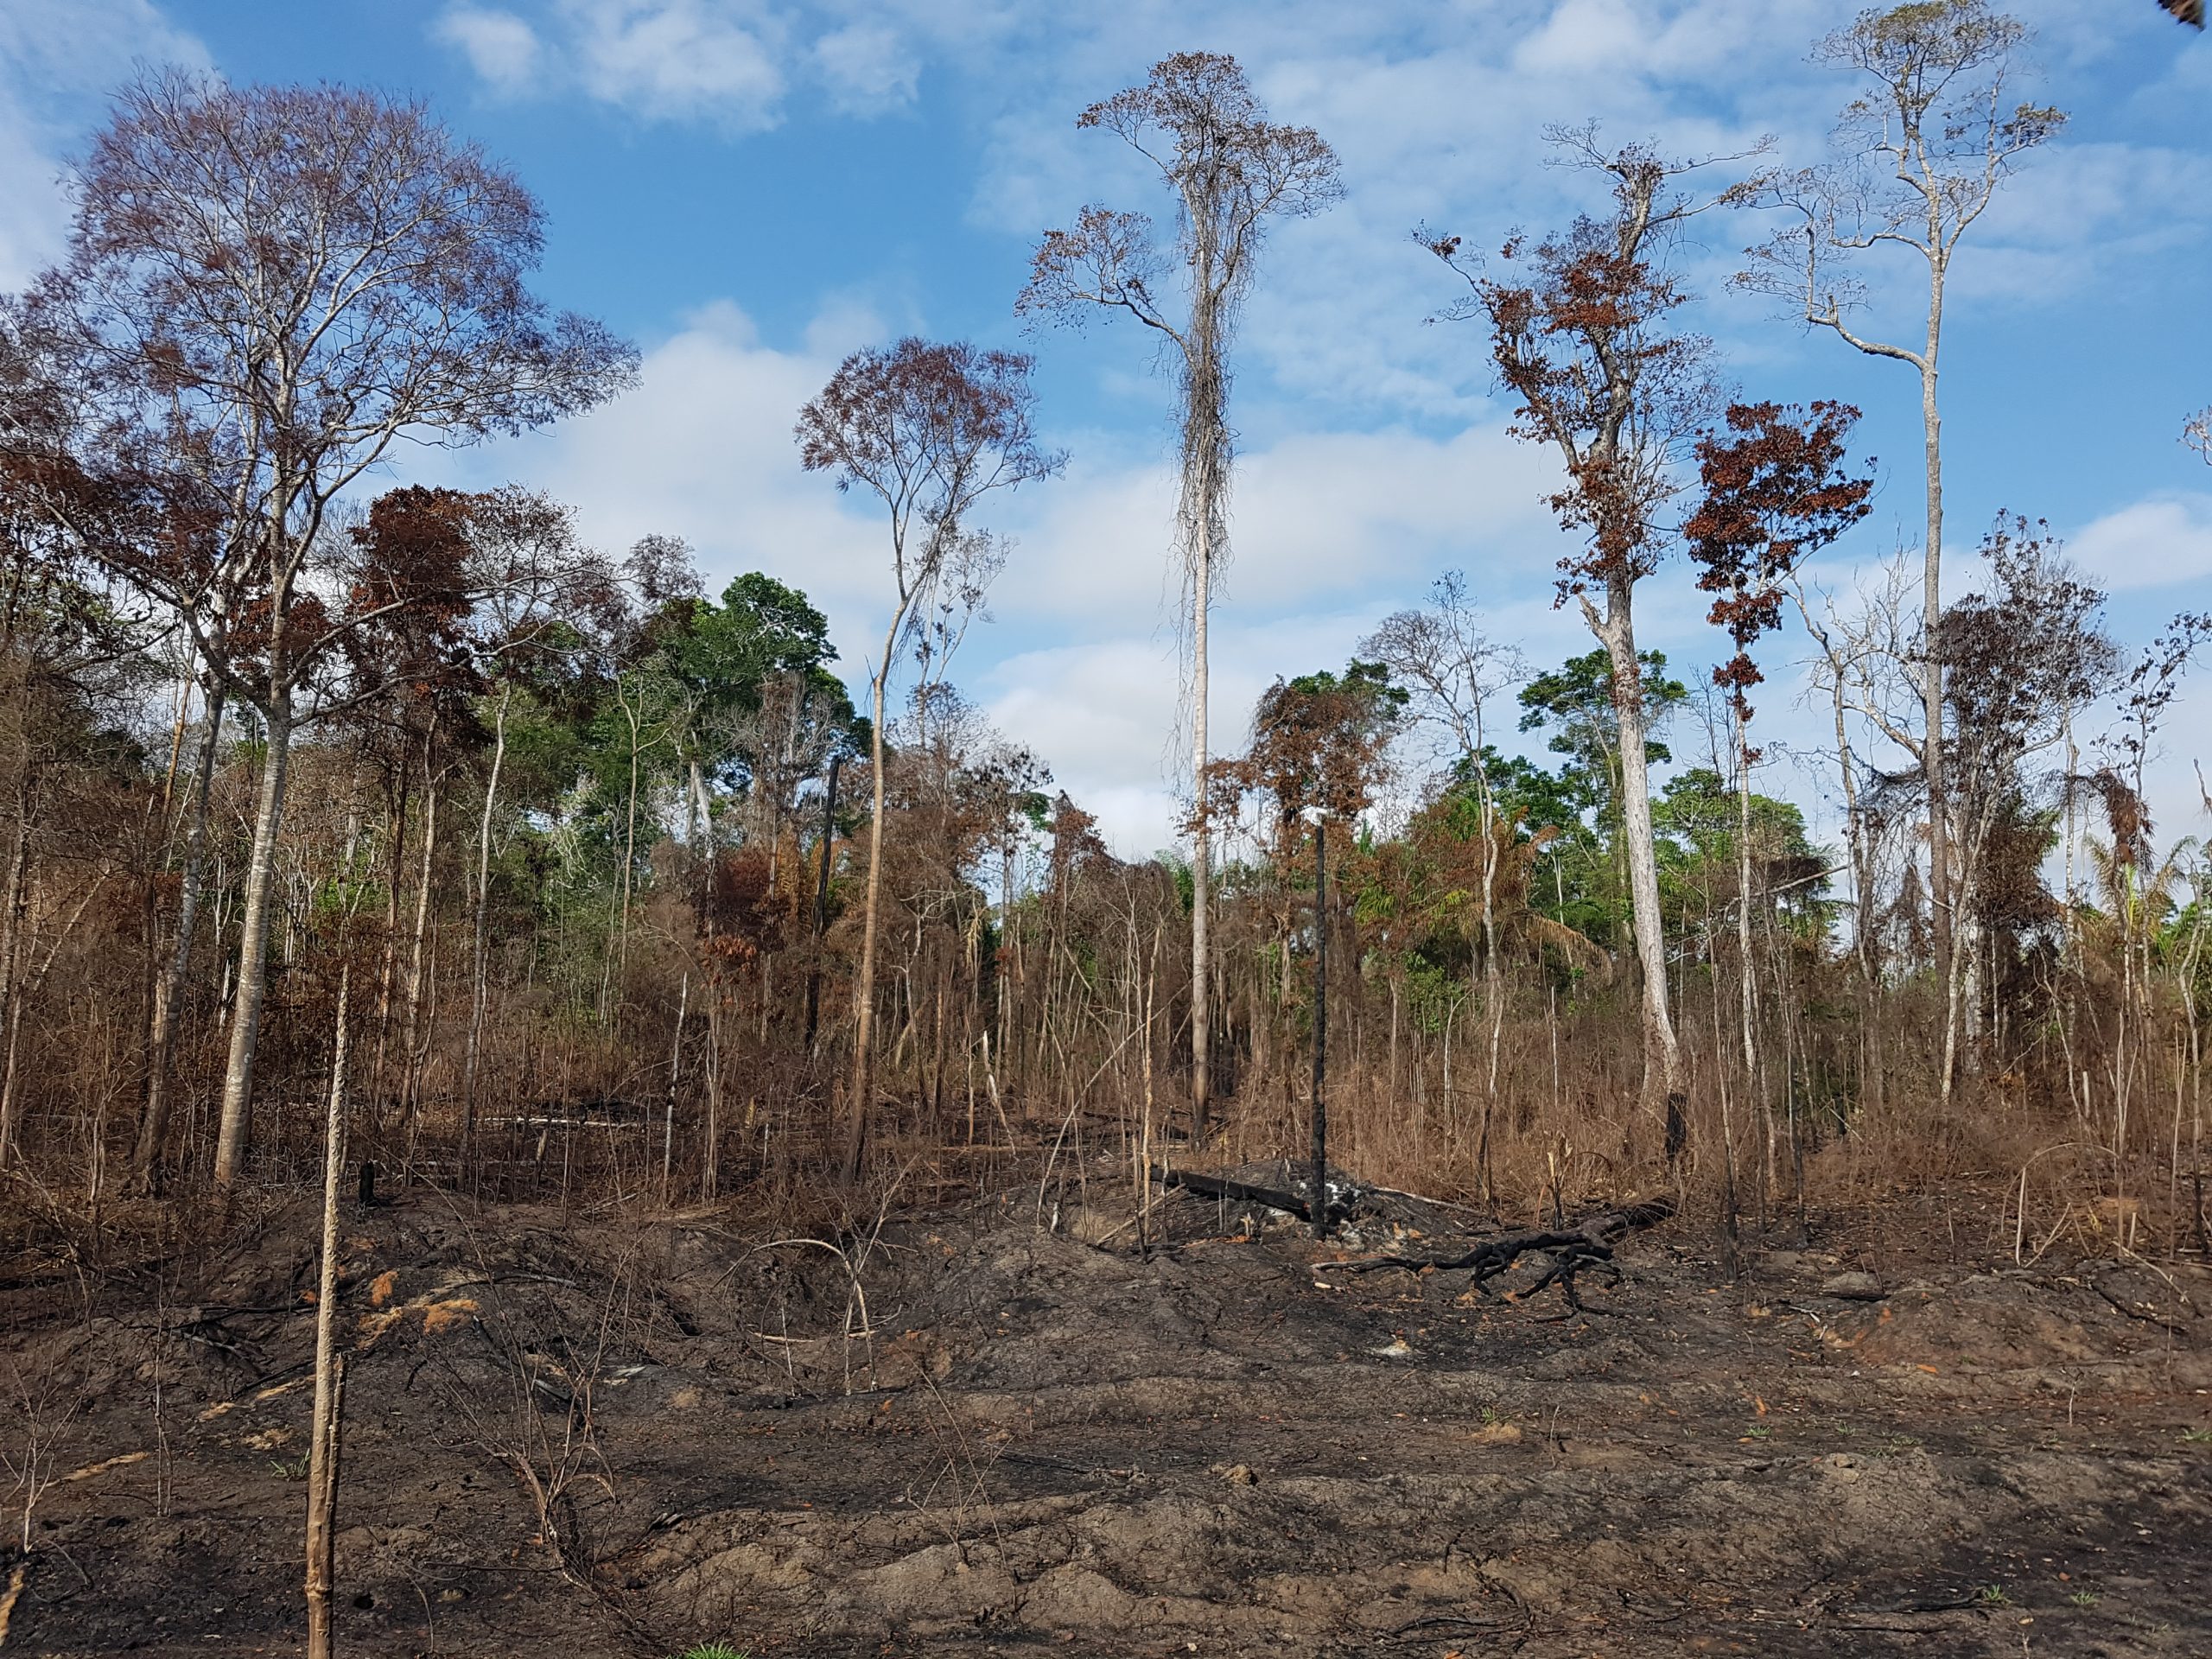 Human activity has degraded more than a third of the remaining amazon rainforest